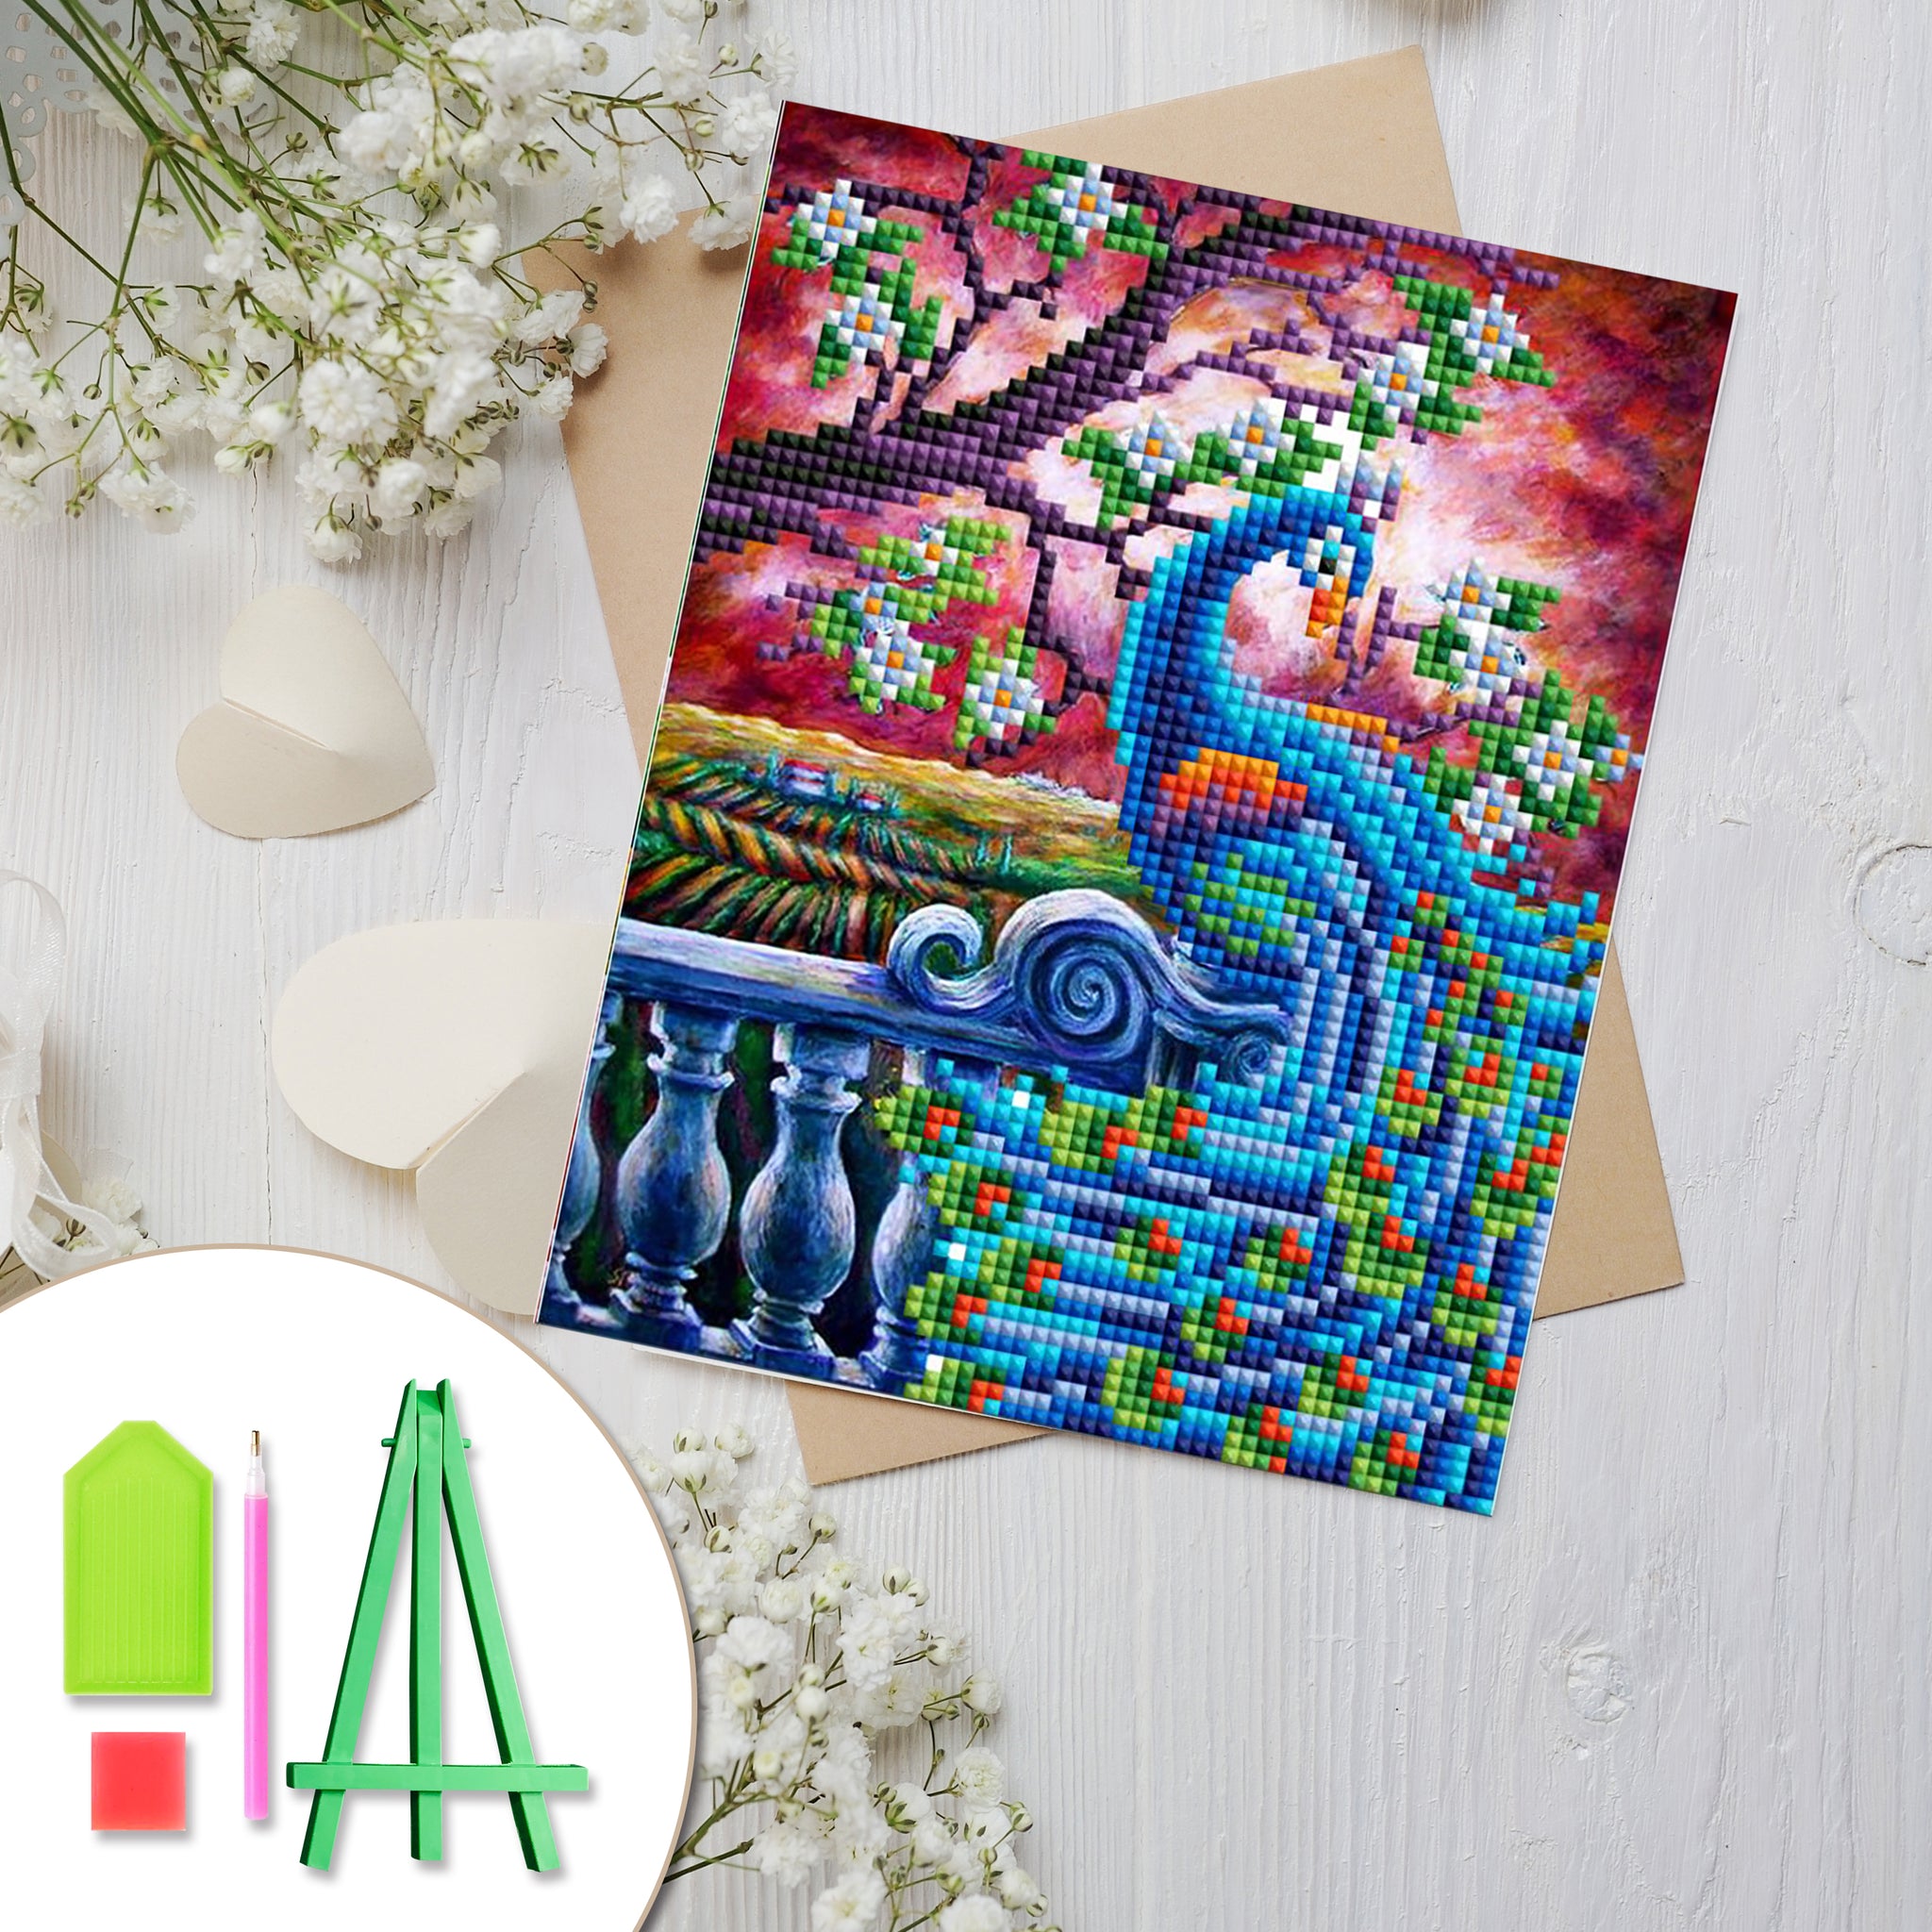 Small diamond Painting with Easel – She-Dazzle Diamond Art